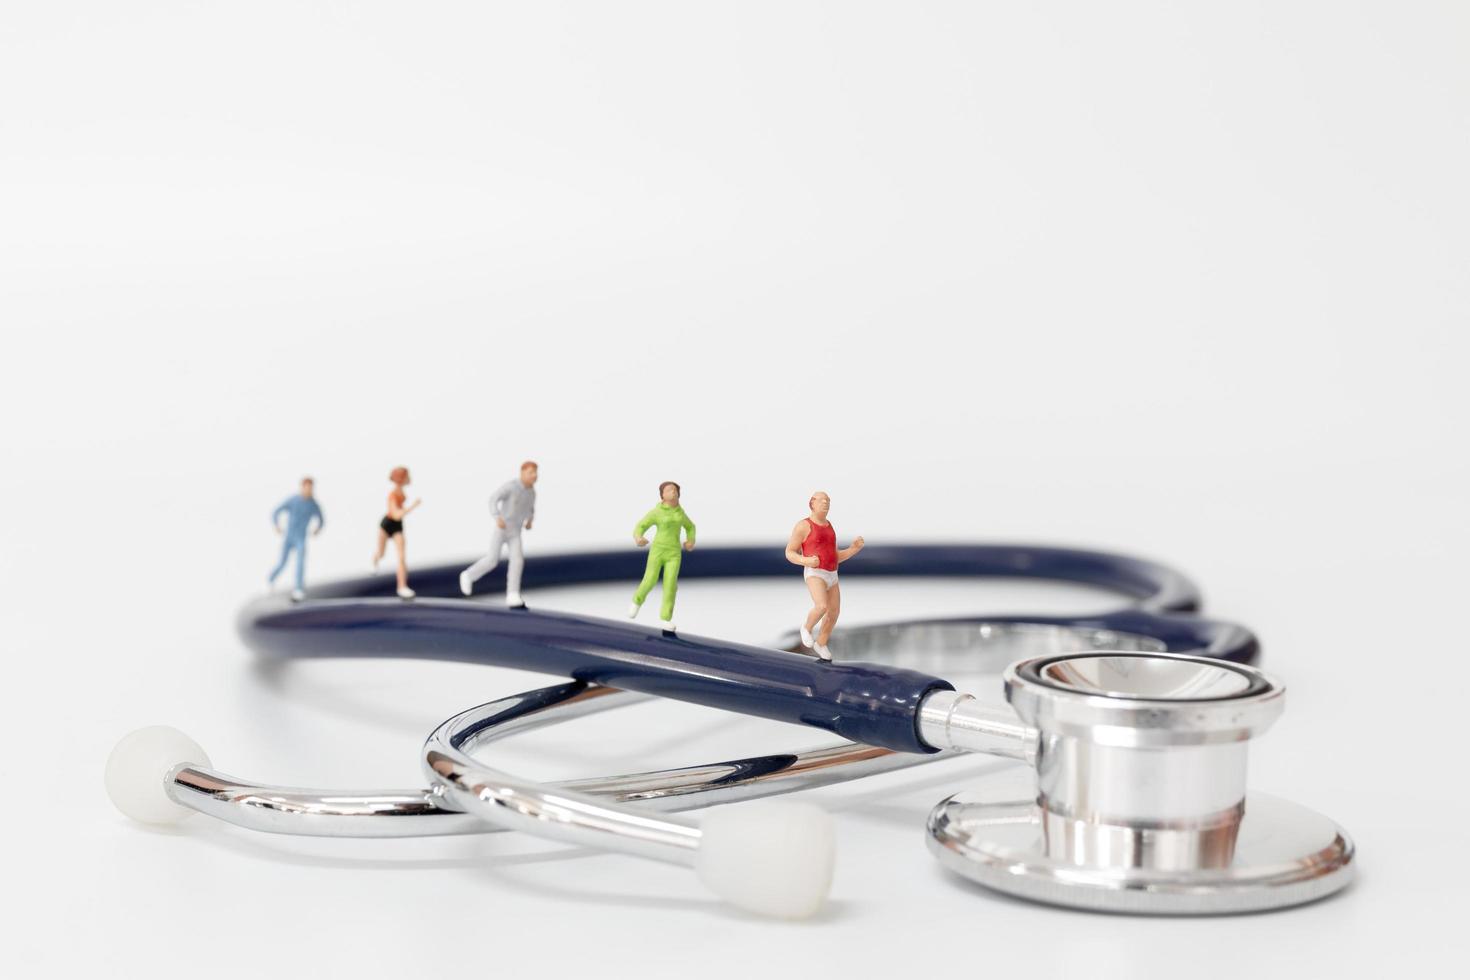 Miniature people running on a stethoscope, sports and healthy concept photo